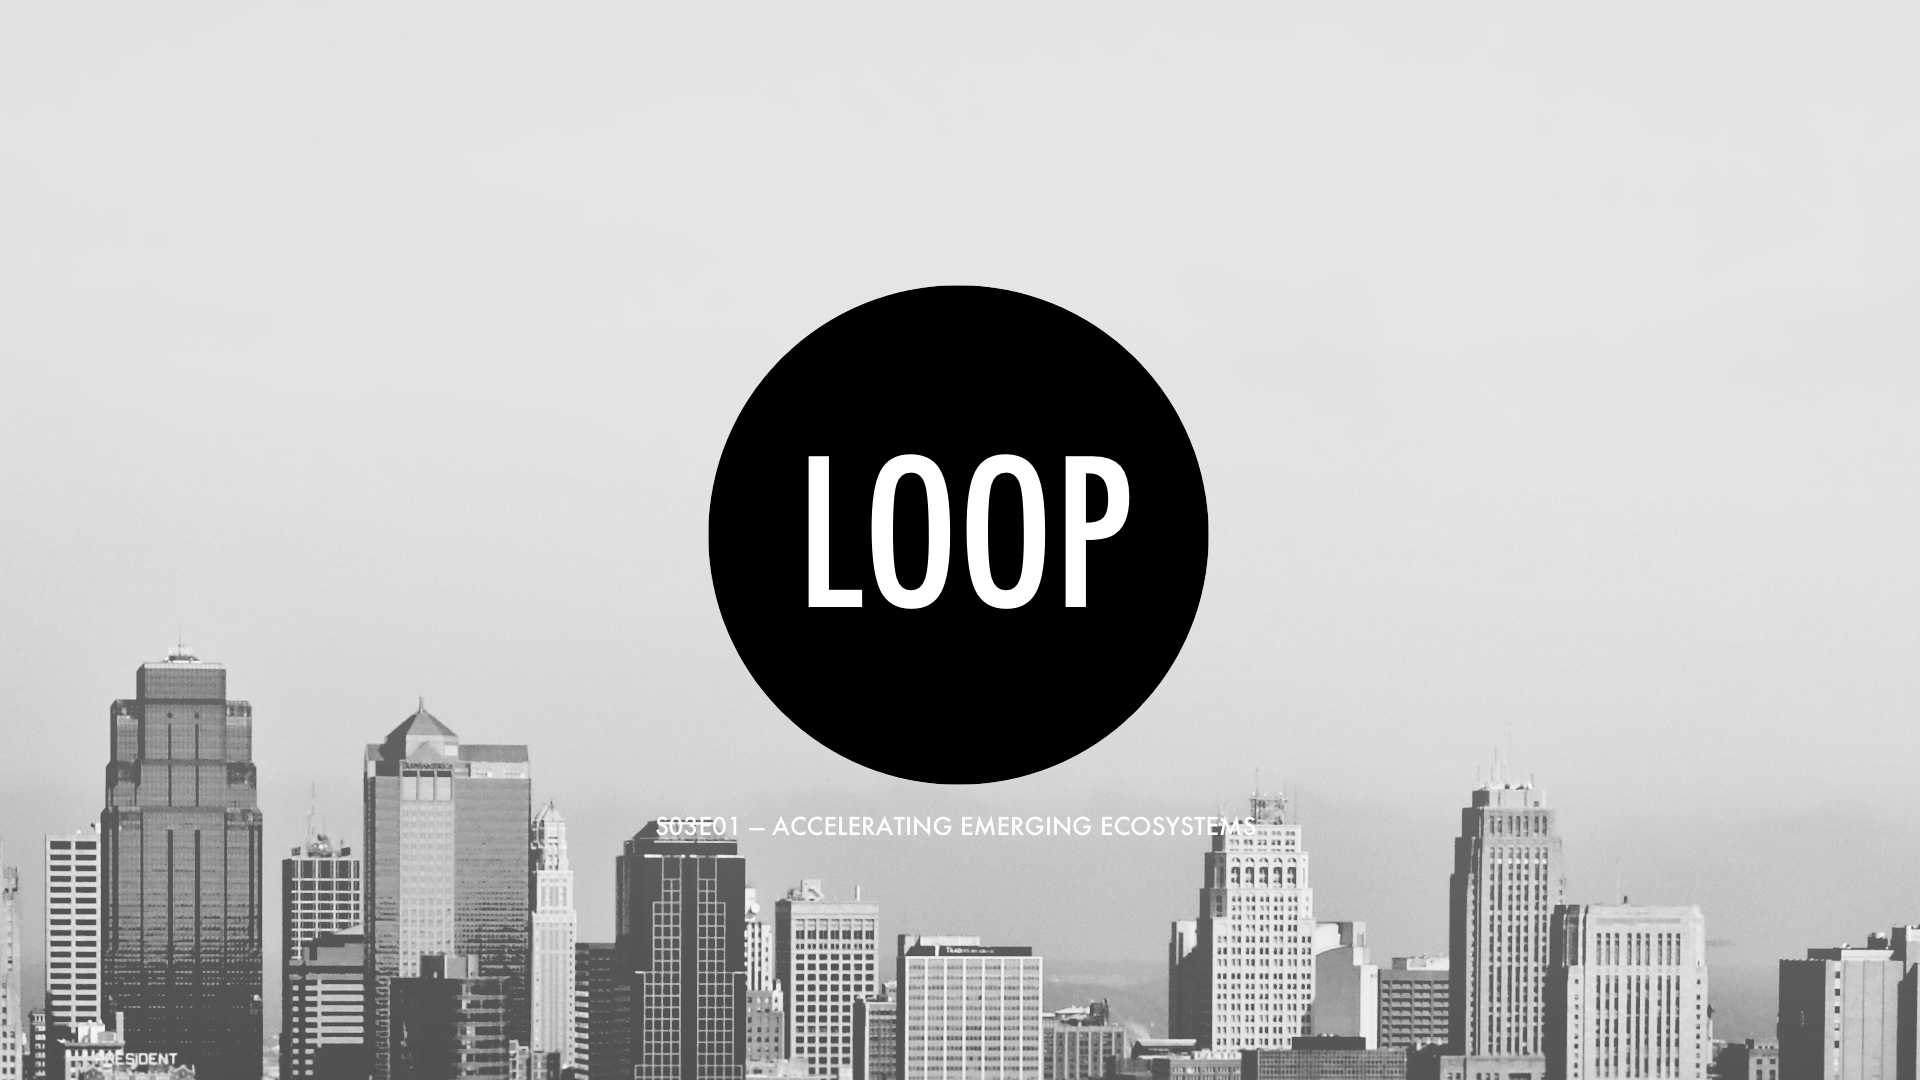 S03E01 Accelerating Emerging Ecosystems — The Digital Loop